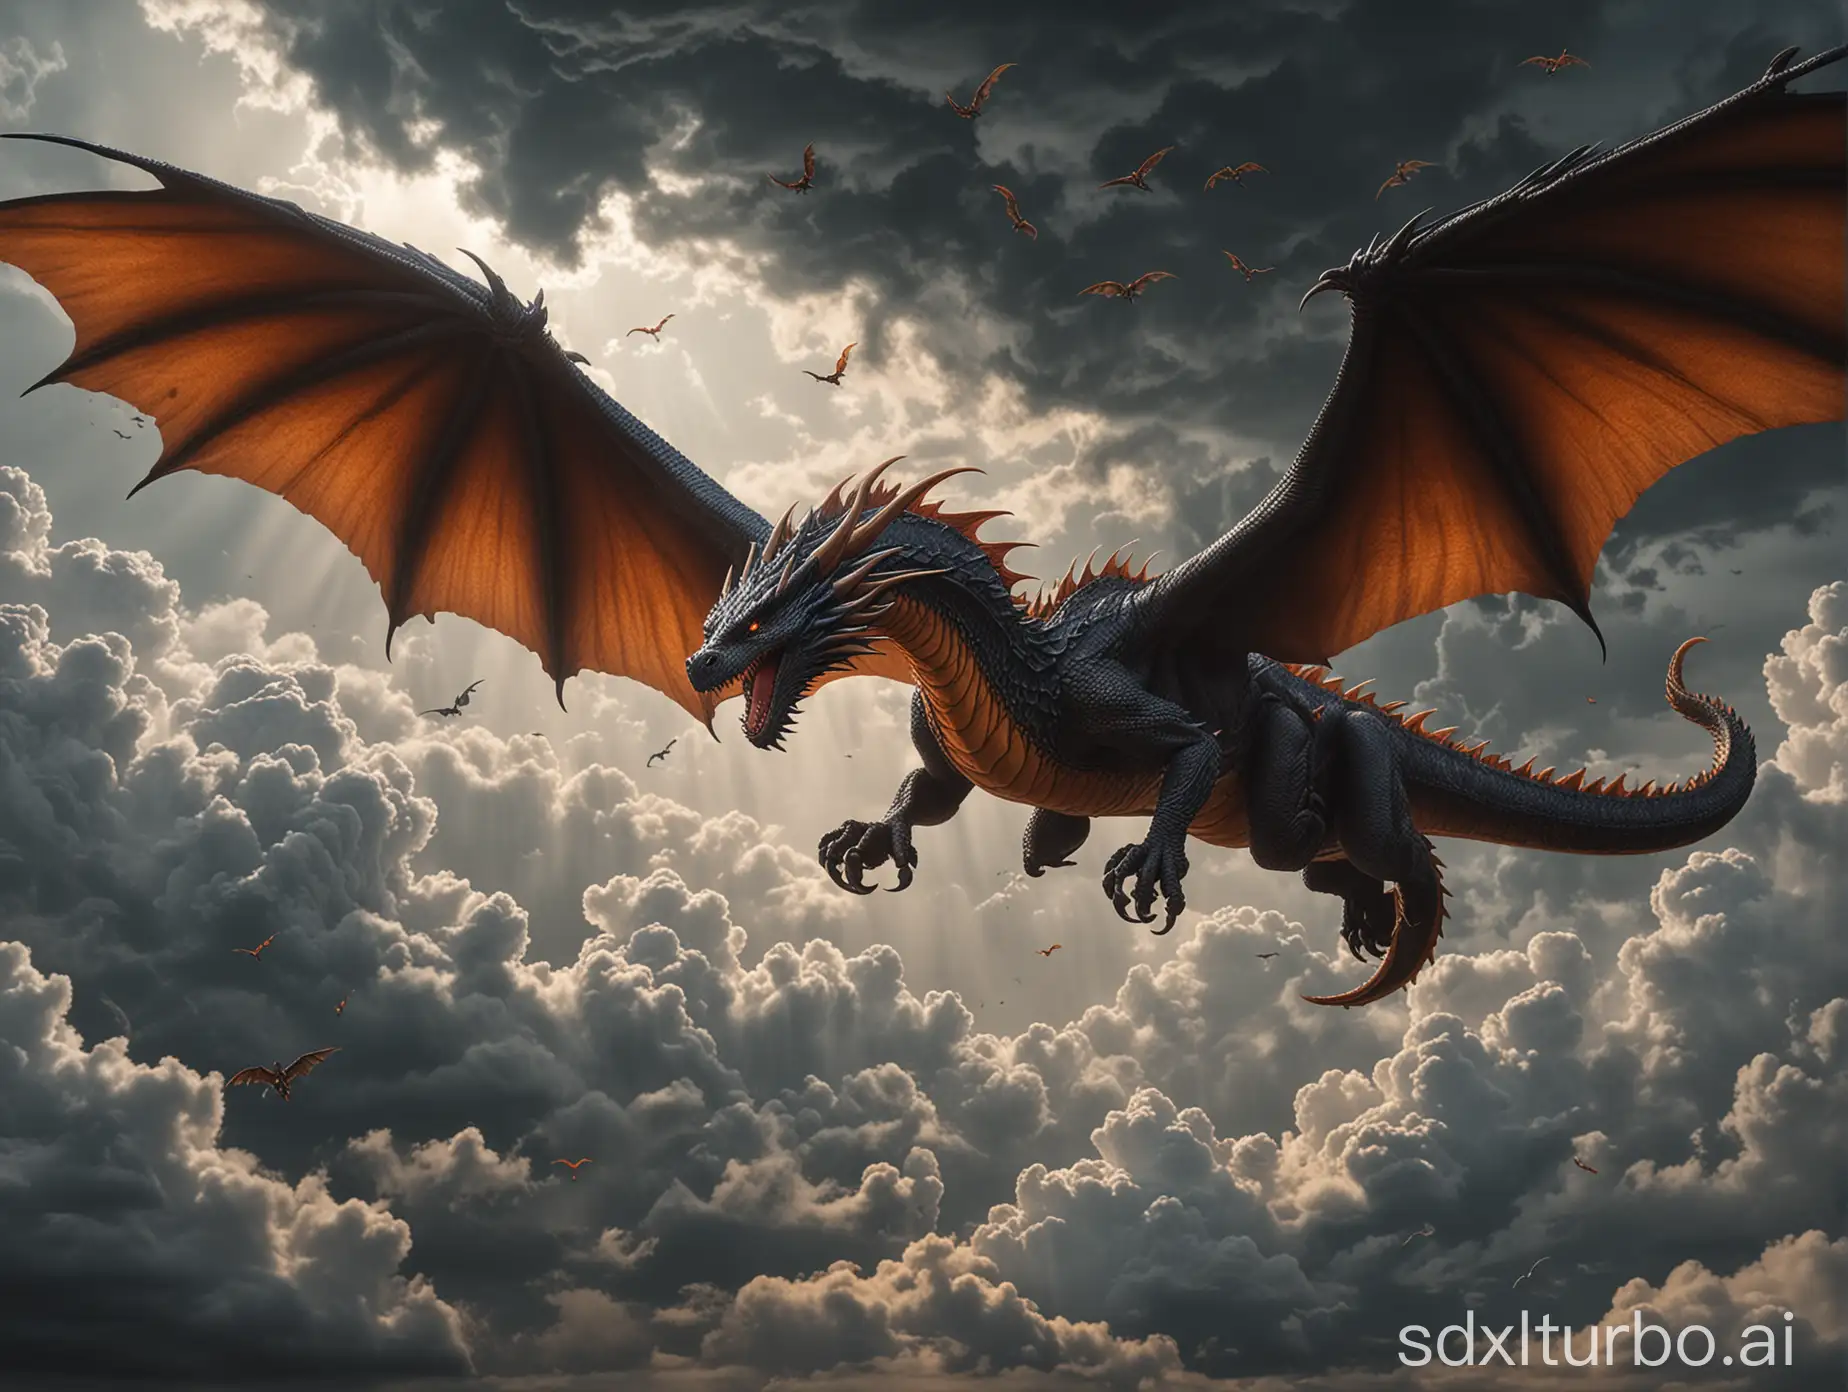 Epic-Dragon-Battle-in-the-Cloudy-Sky